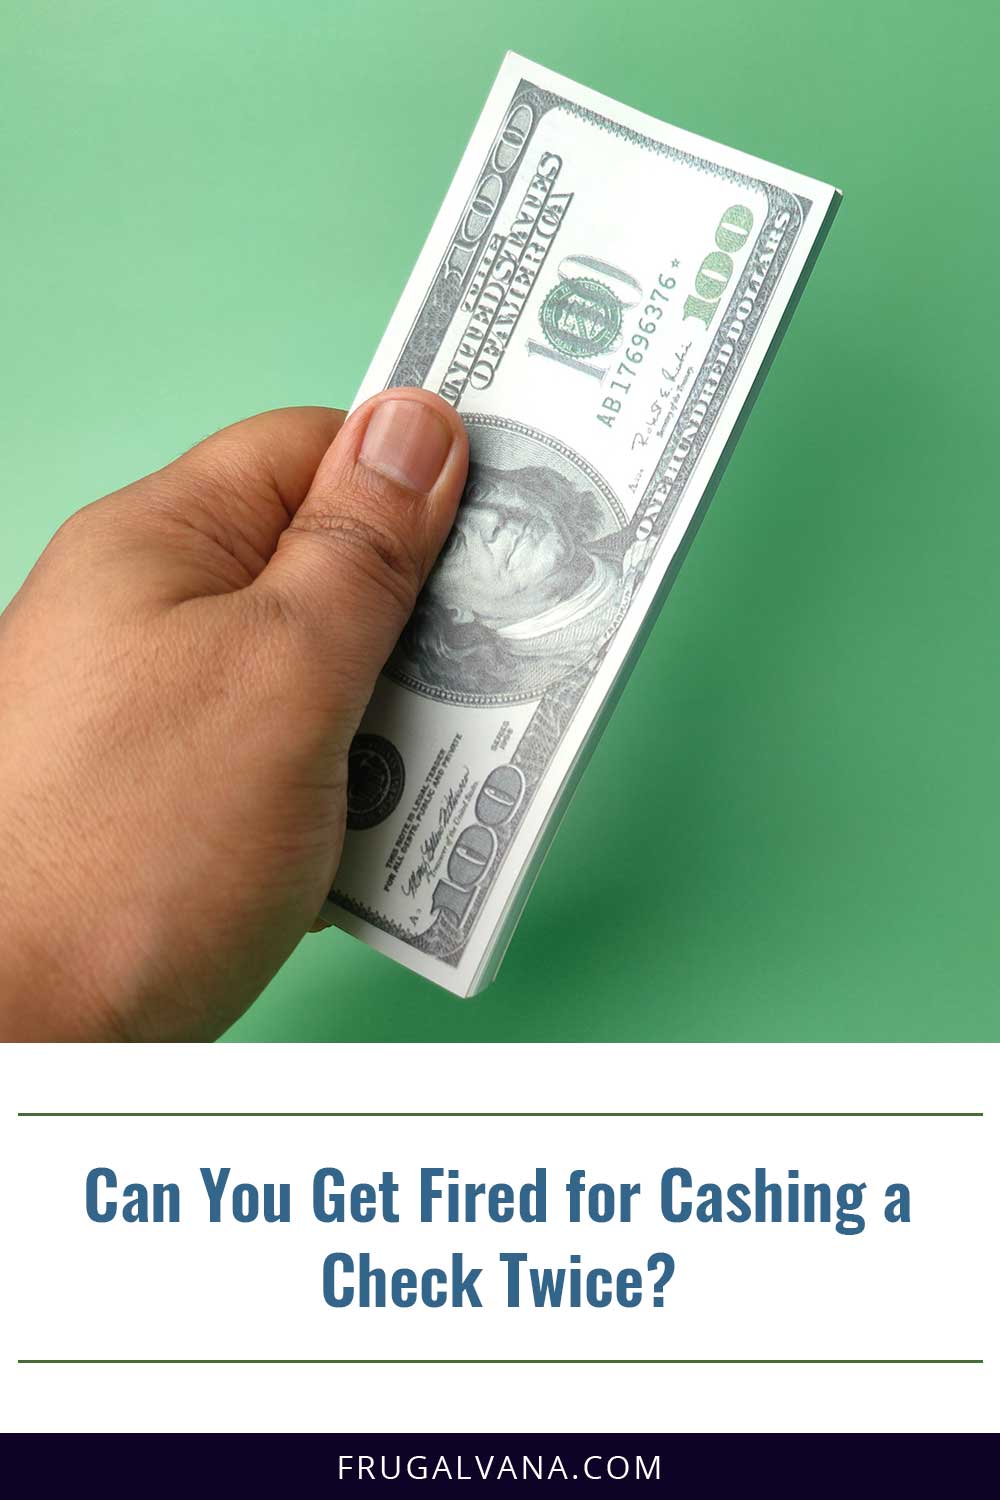 Can You Get Fired for Cashing a Check Twice?